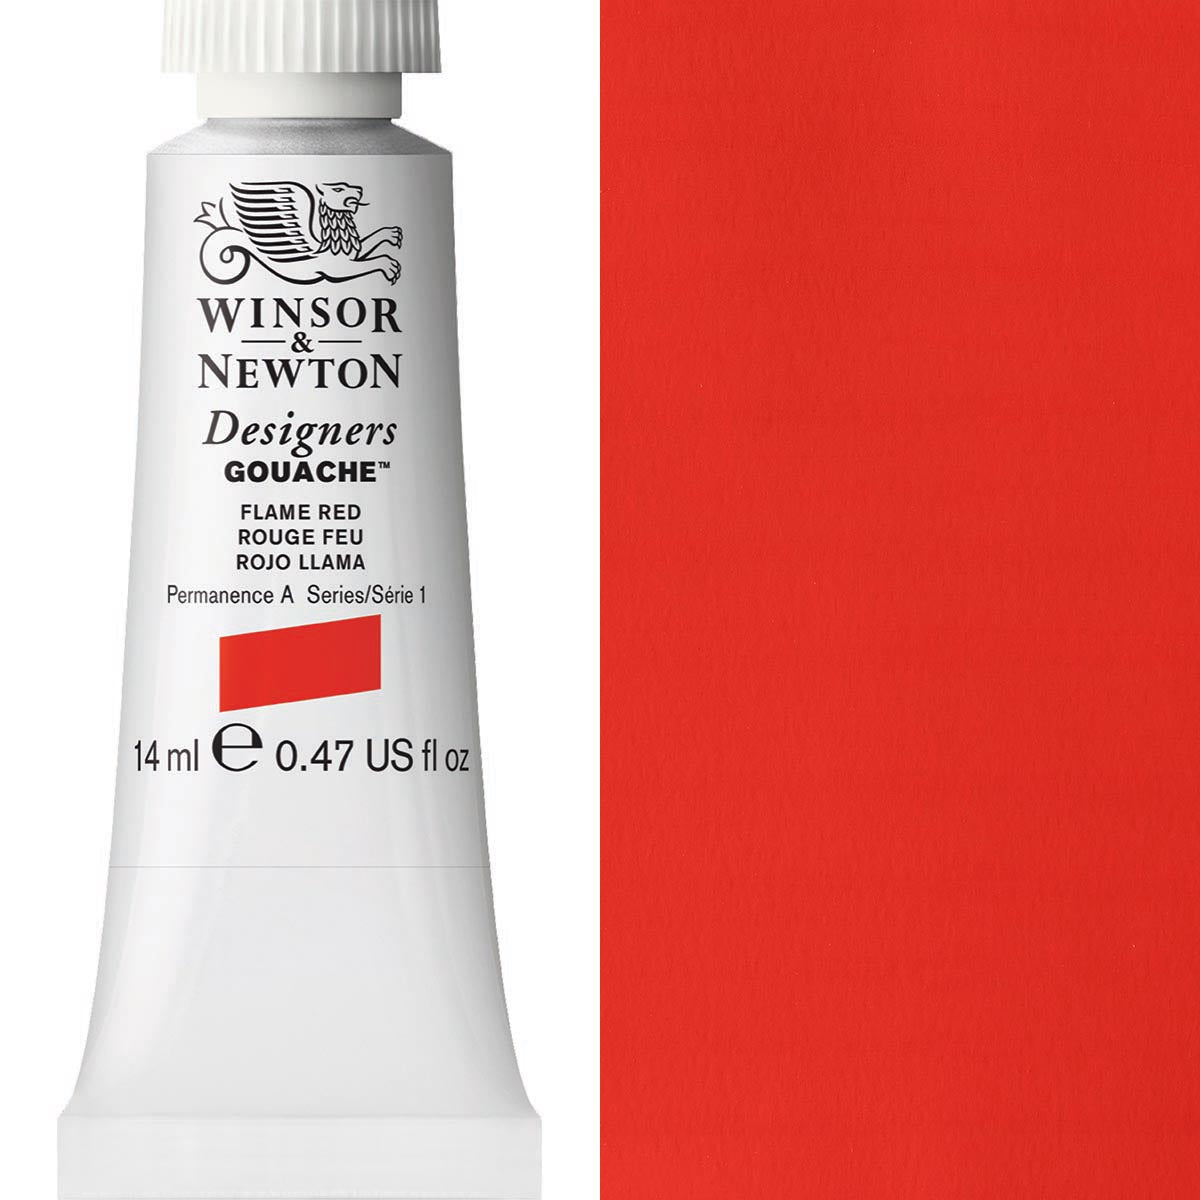 Winsor and Newton - Designers Gouache - 14ml - Flame Red